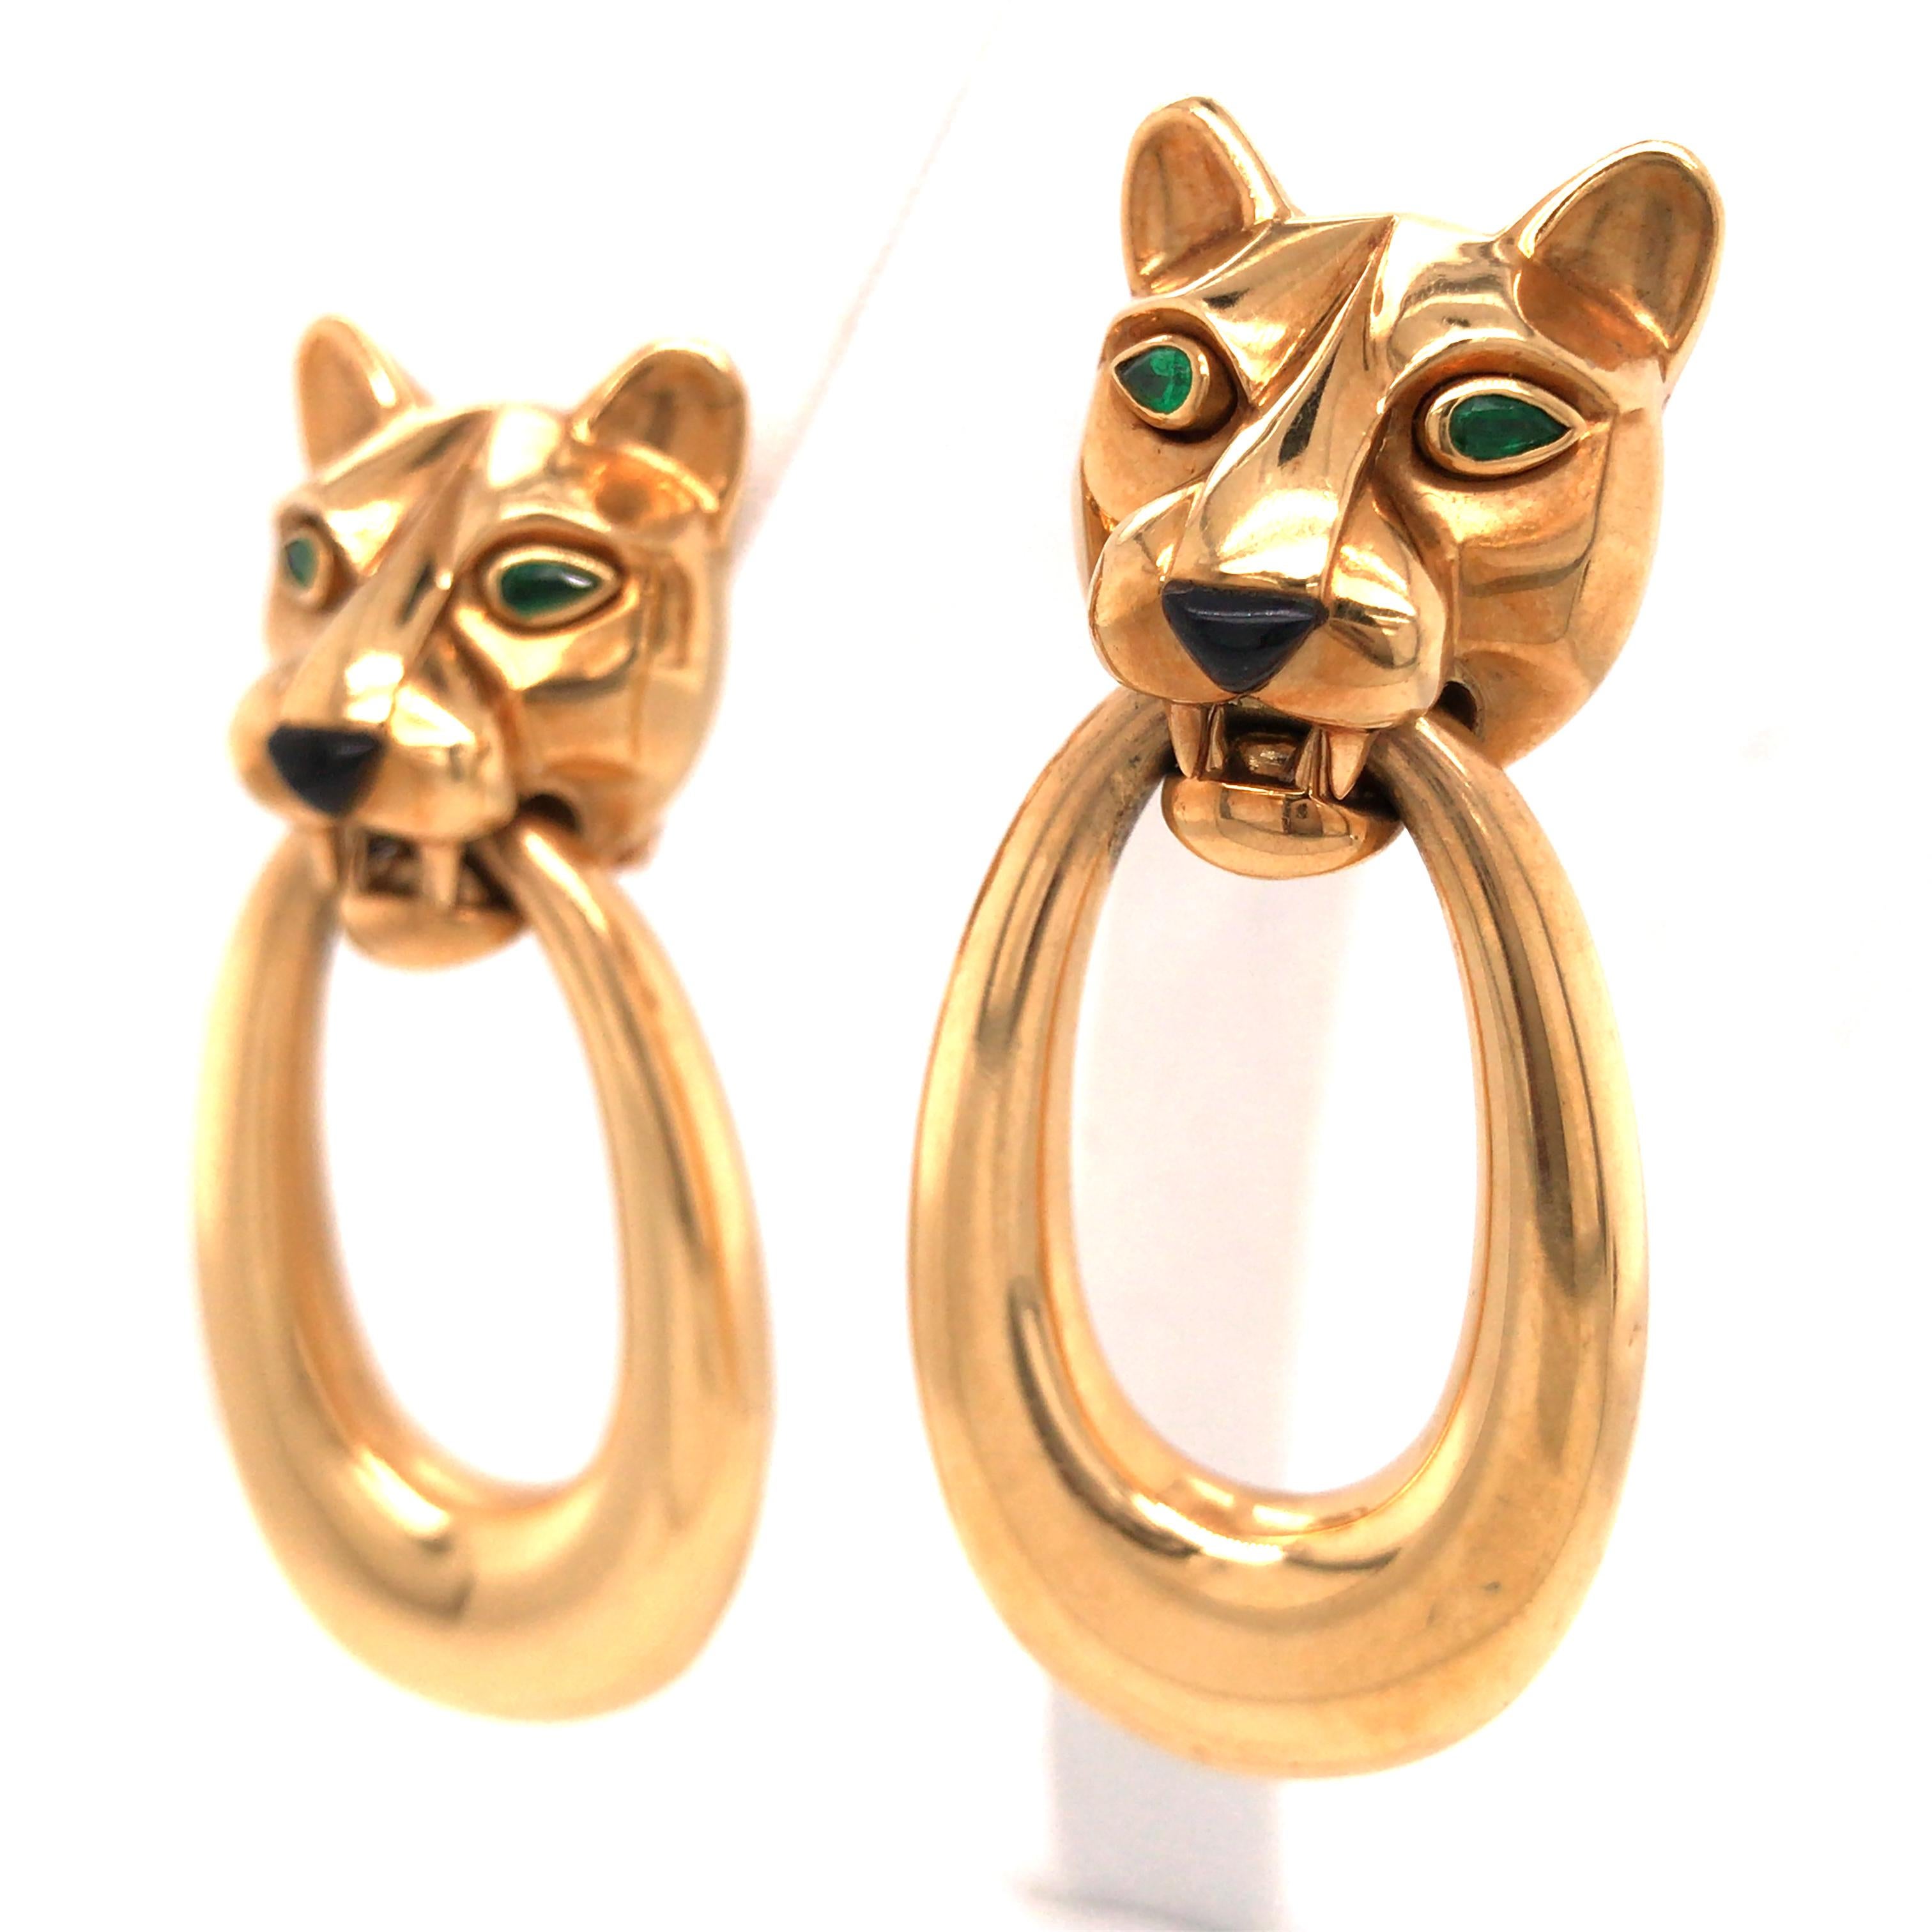 Cartier 18 Karat Yellow Gold Panthere Door Knocker Earrings.  Expertly set with (4) Pear Shape Emeralds and (2) Trillion shape Black Onyx Cabochons. The Earrings measure 2 1/8 inch in length and 7/8 inch in width.  Hoops are removable allowing the